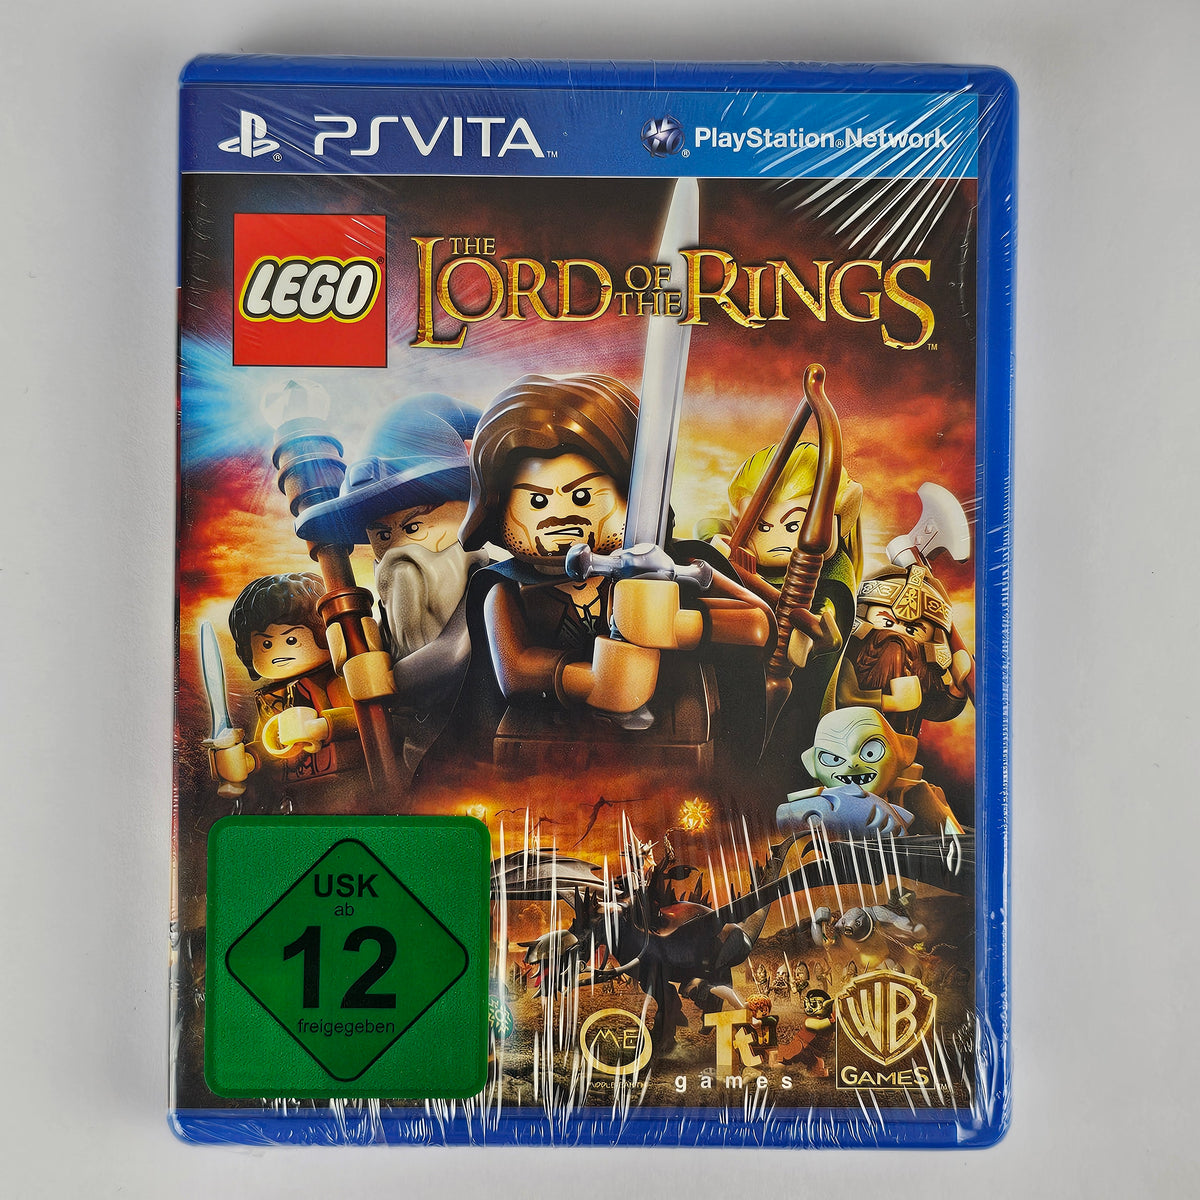 Lego Lord of the Rings [PSV]